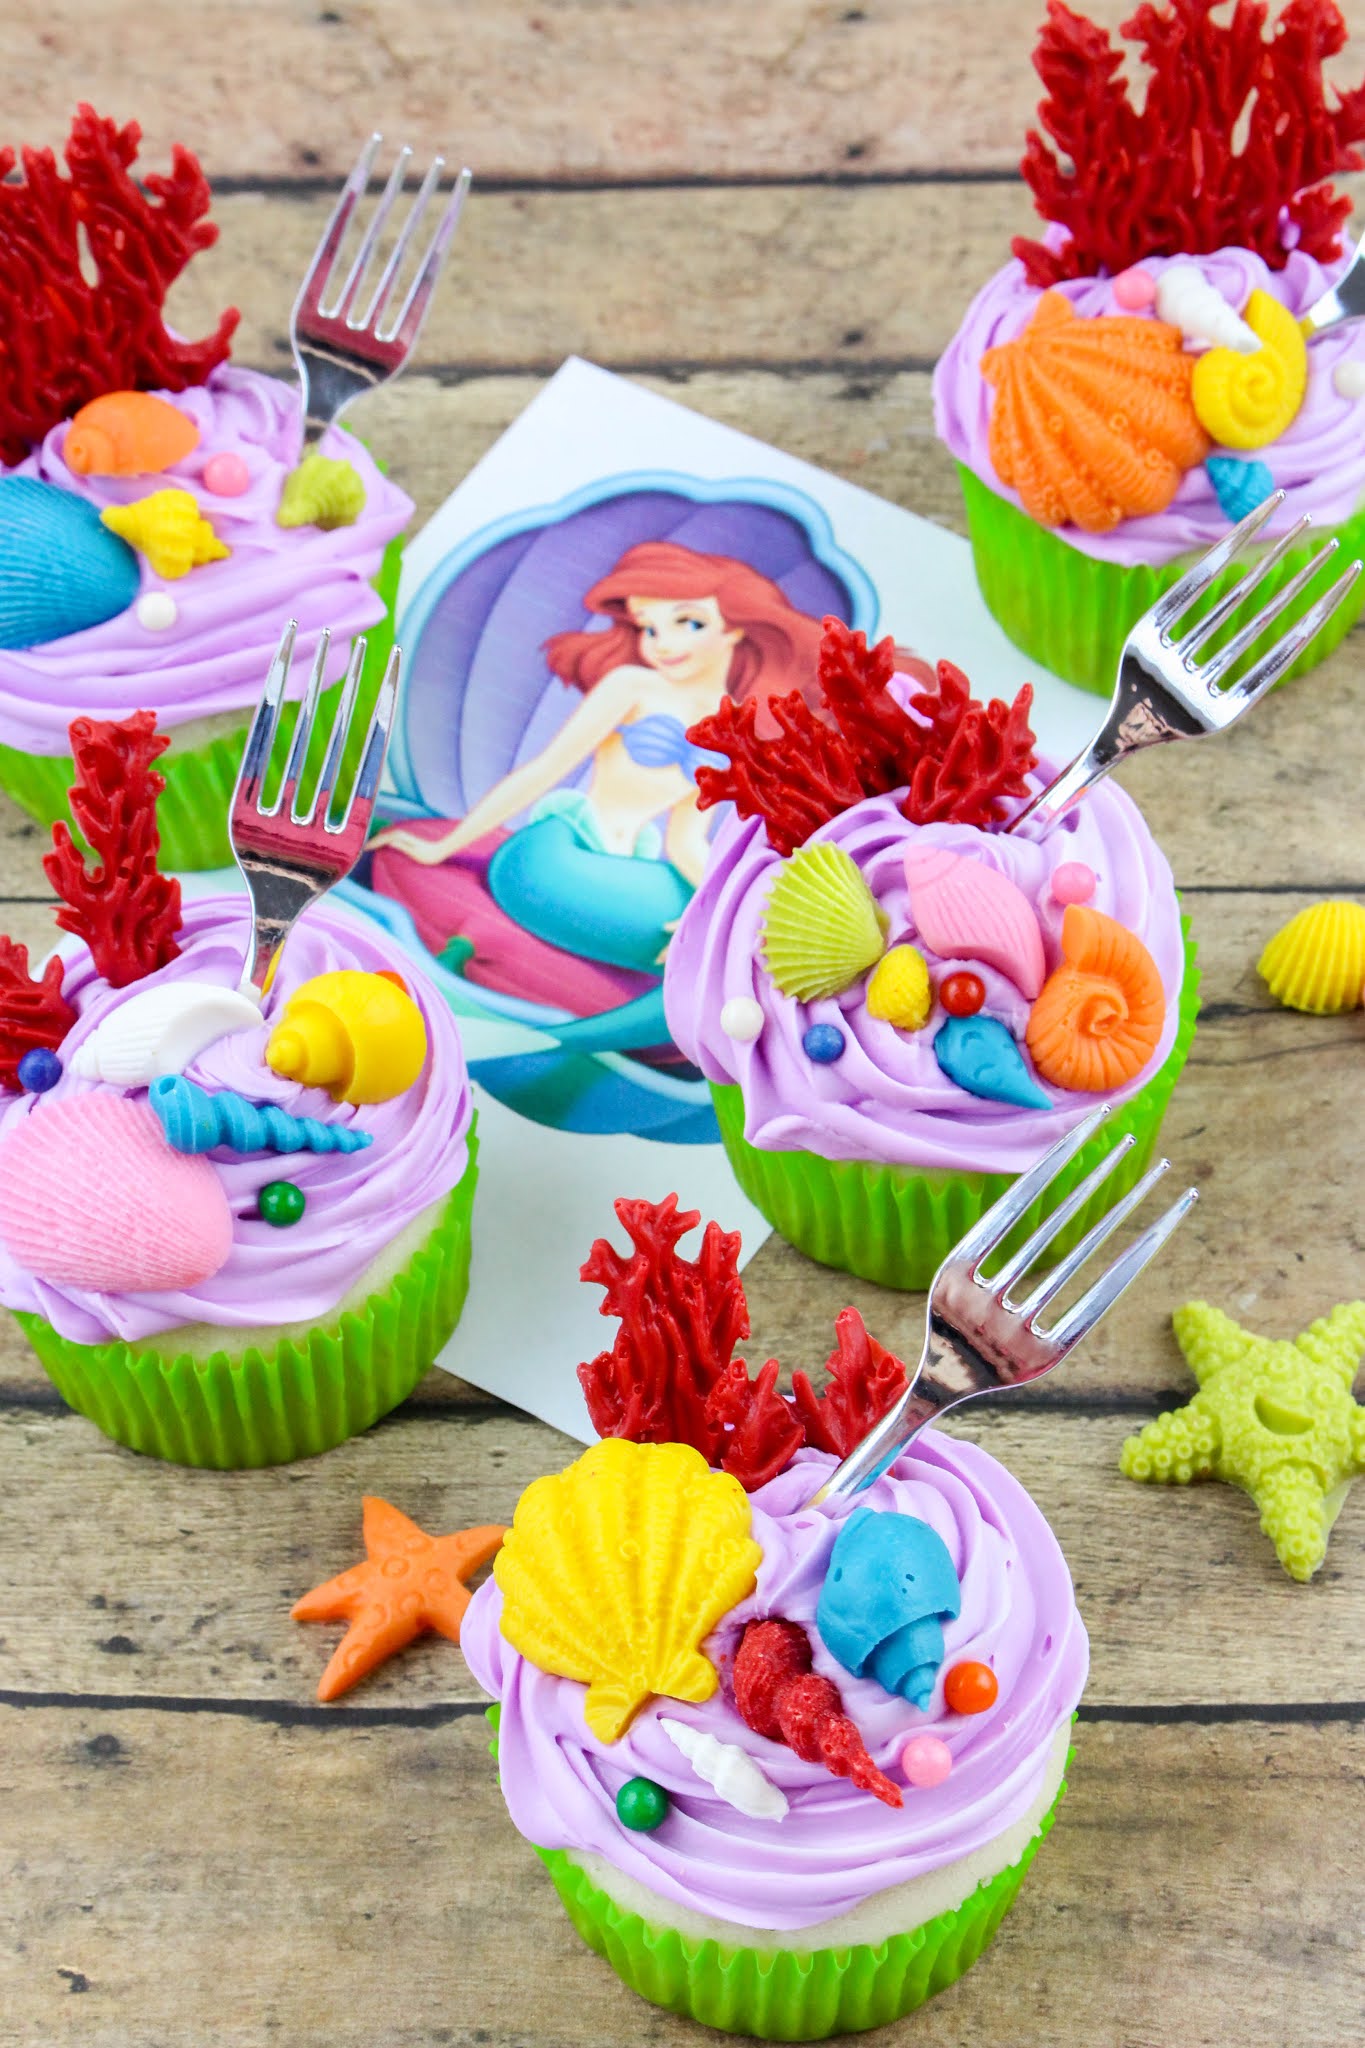 48 Best Photos Little Mermaid Icing Decorations - The Little Mermaid Ariel Stand Up Cake Toppers Decorations Premium Wafer Card Ebay